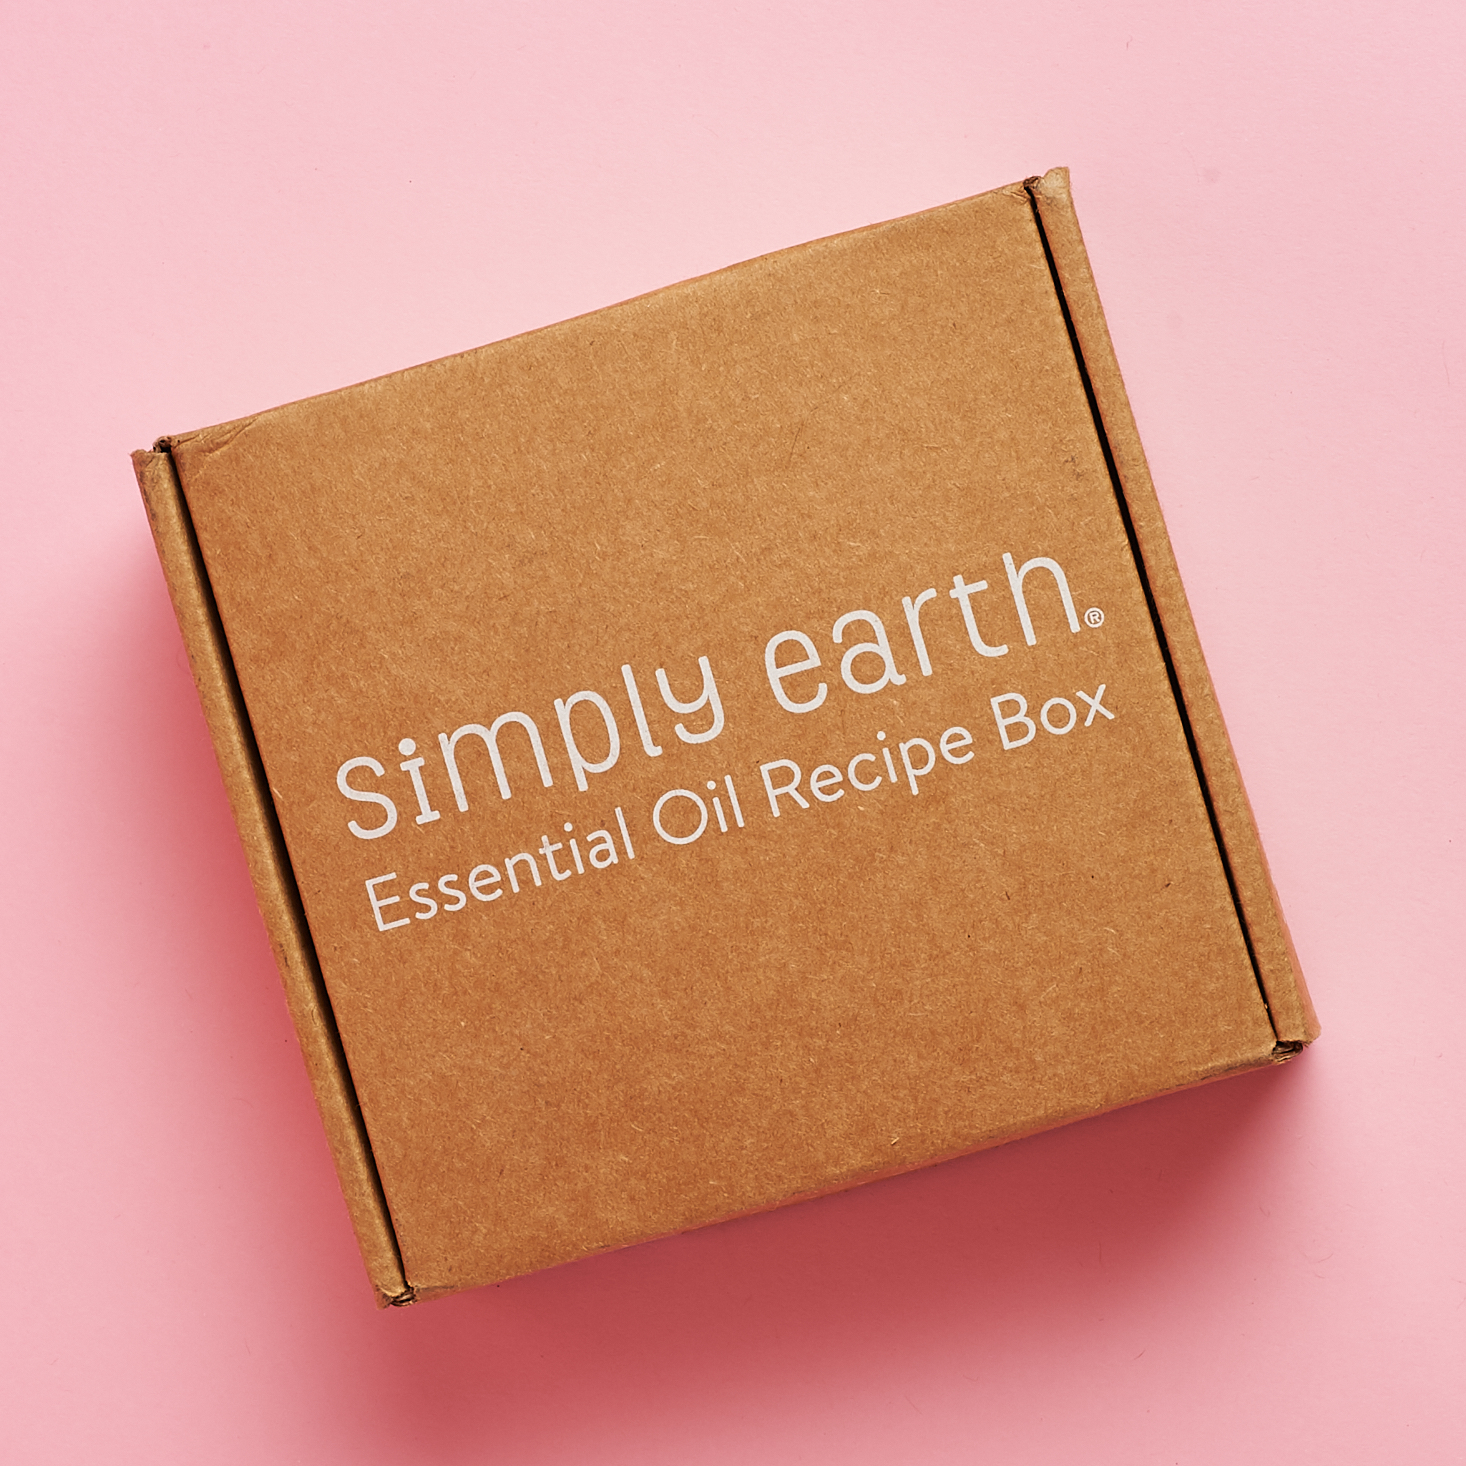 Simply Earth Essential Oil Recipe Box Review + Coupon – November 2019